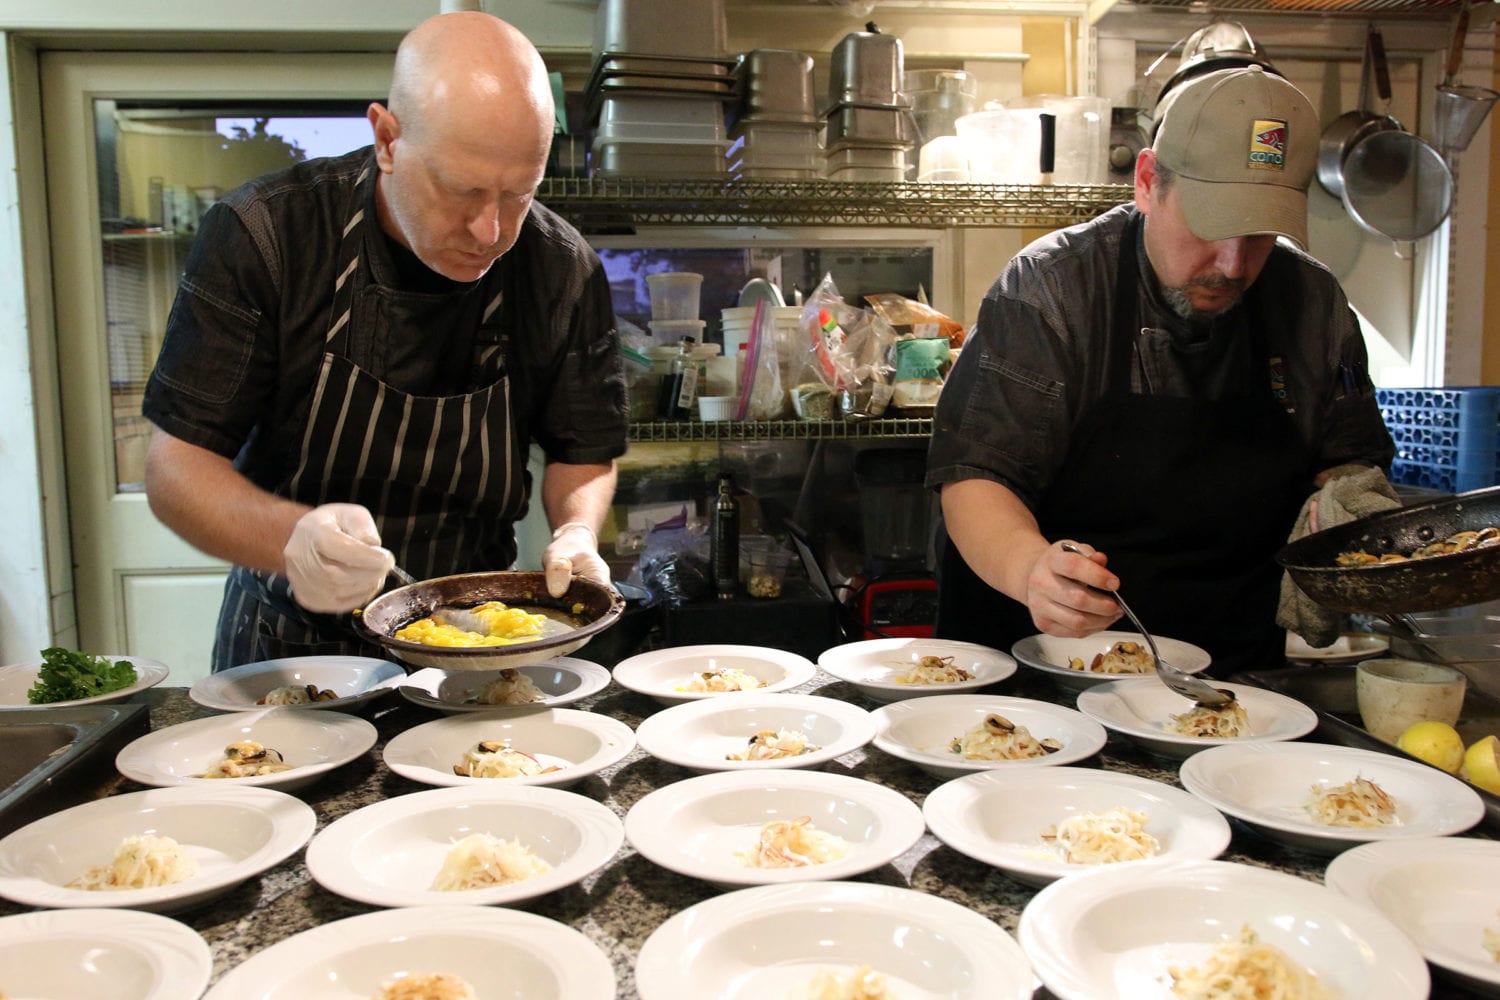 Two chefs plating entrees in a kitchen